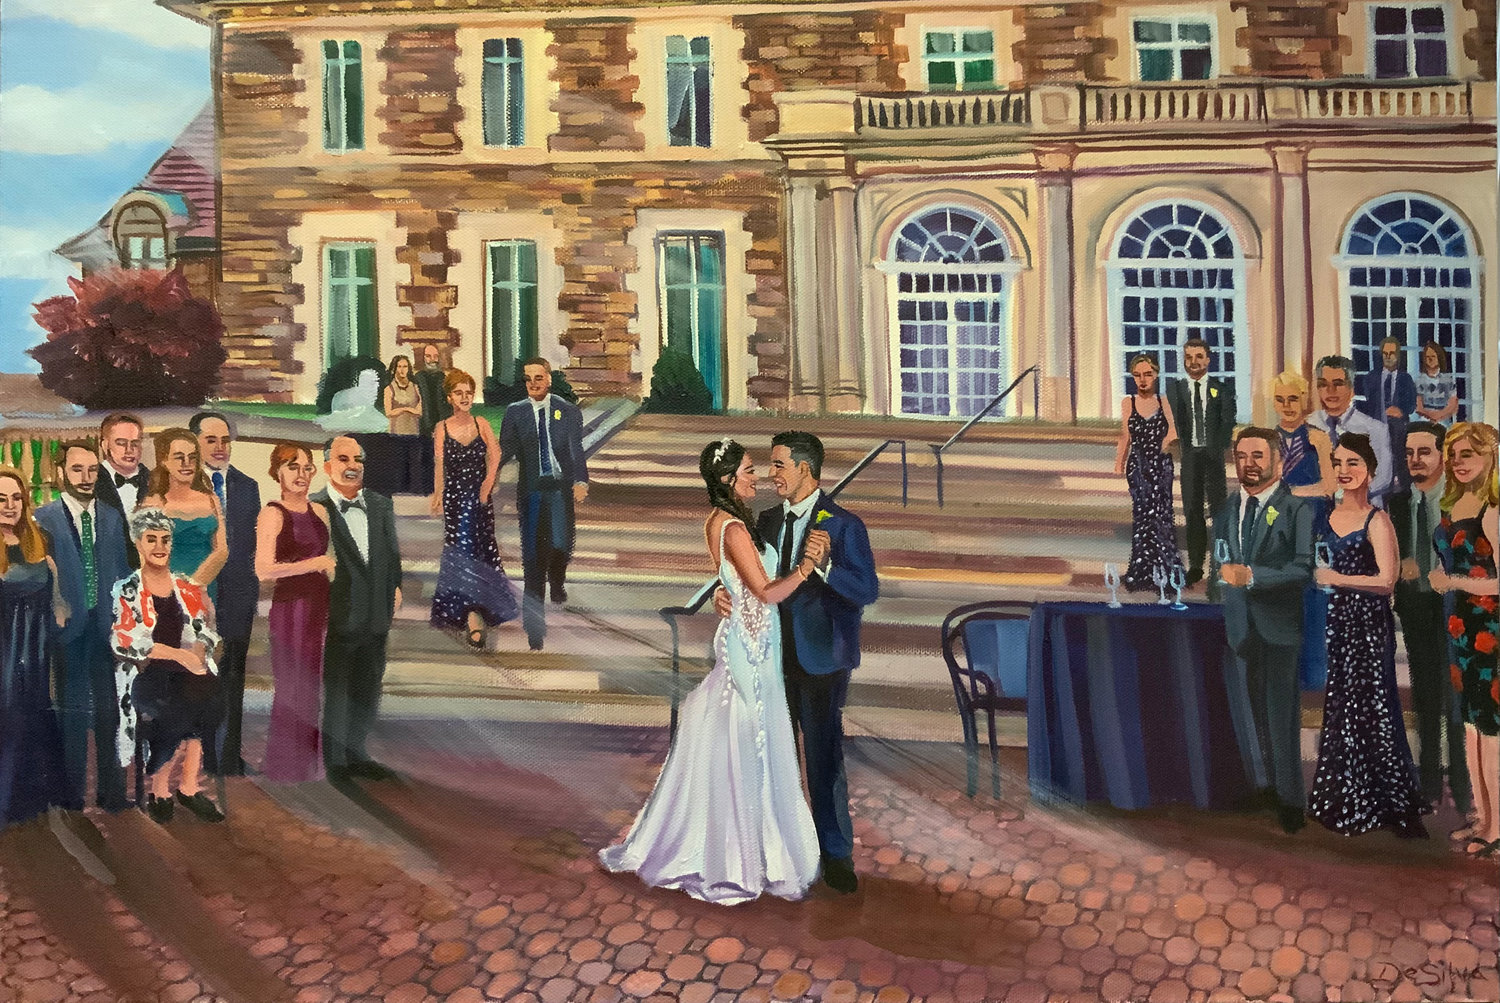 A wedding at Warwick Aldrich Mansion – DeSilva paints in the midst of the festivities